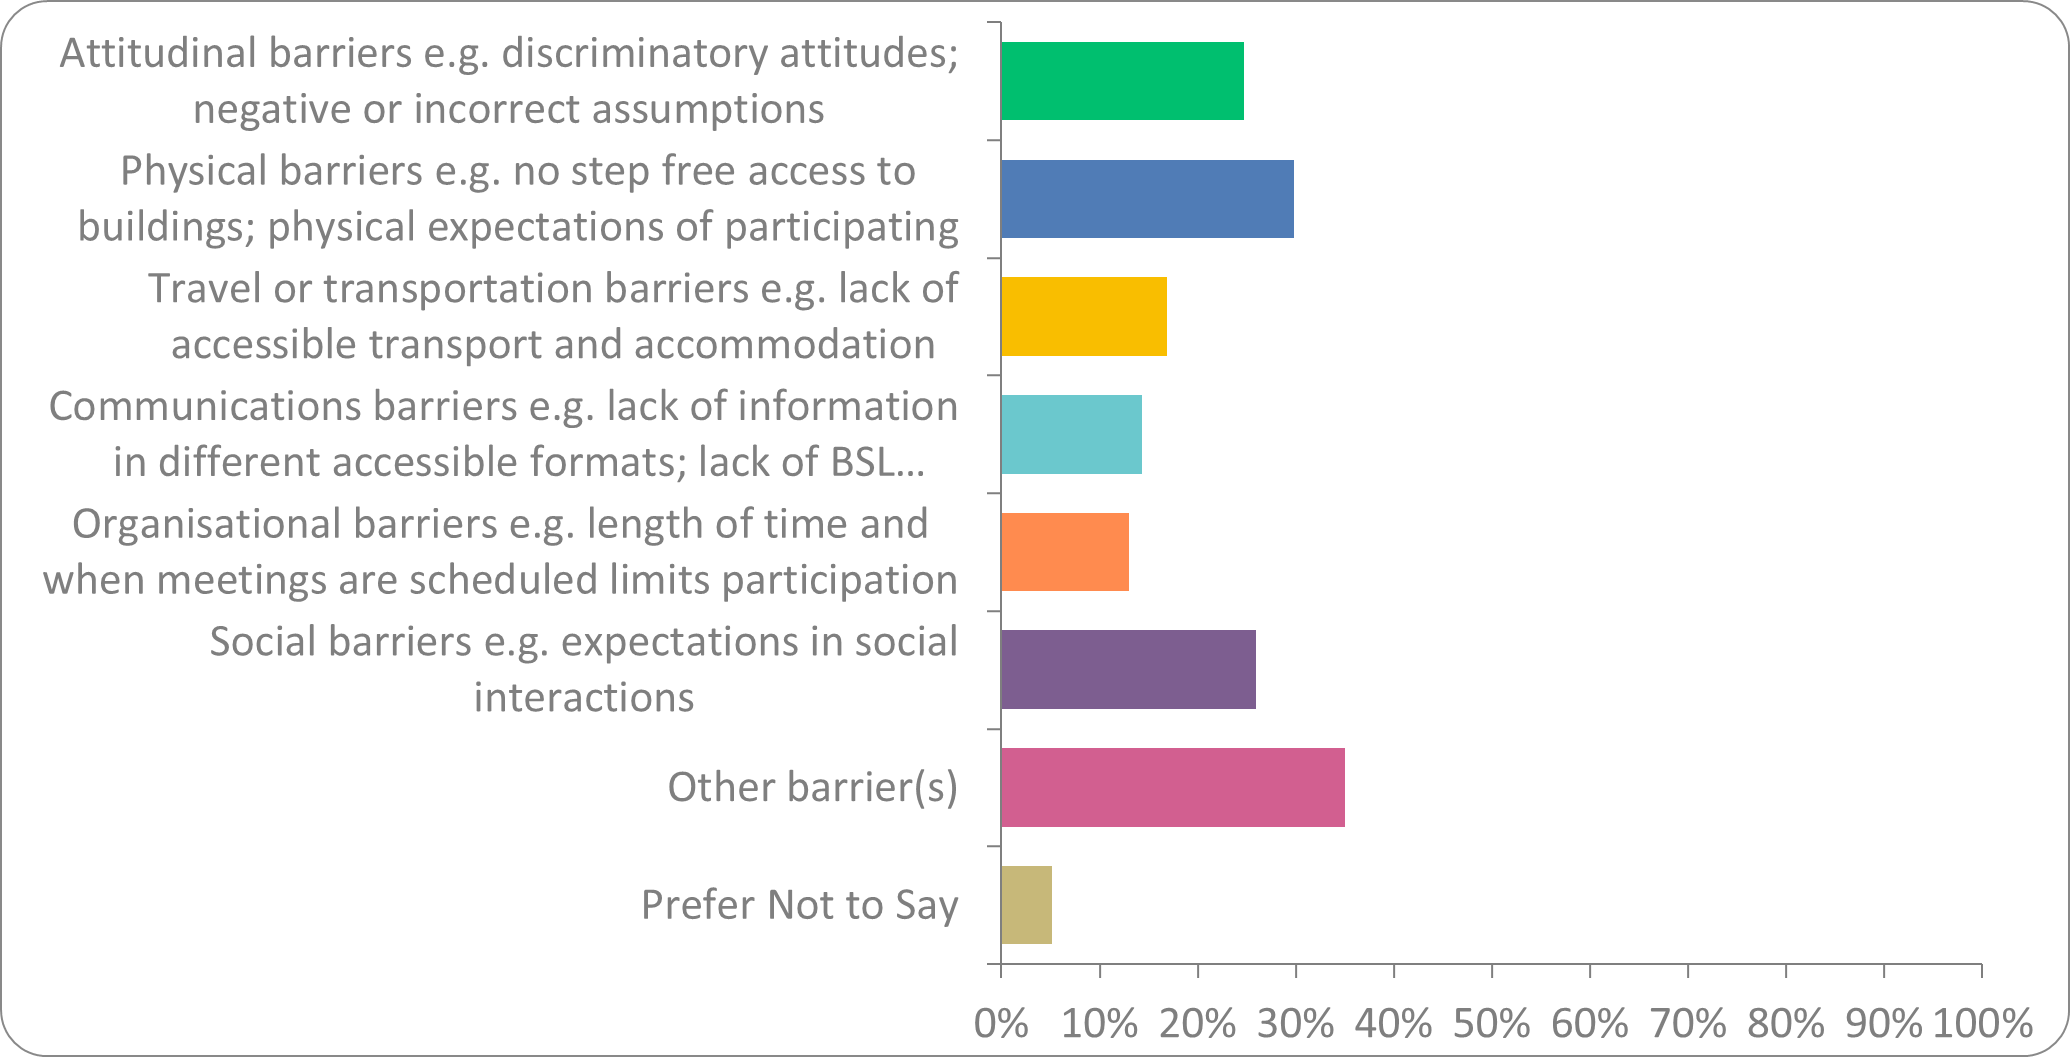 Chart showing RMetS' member insights into barriers and limitations faced in day-to-day life. 